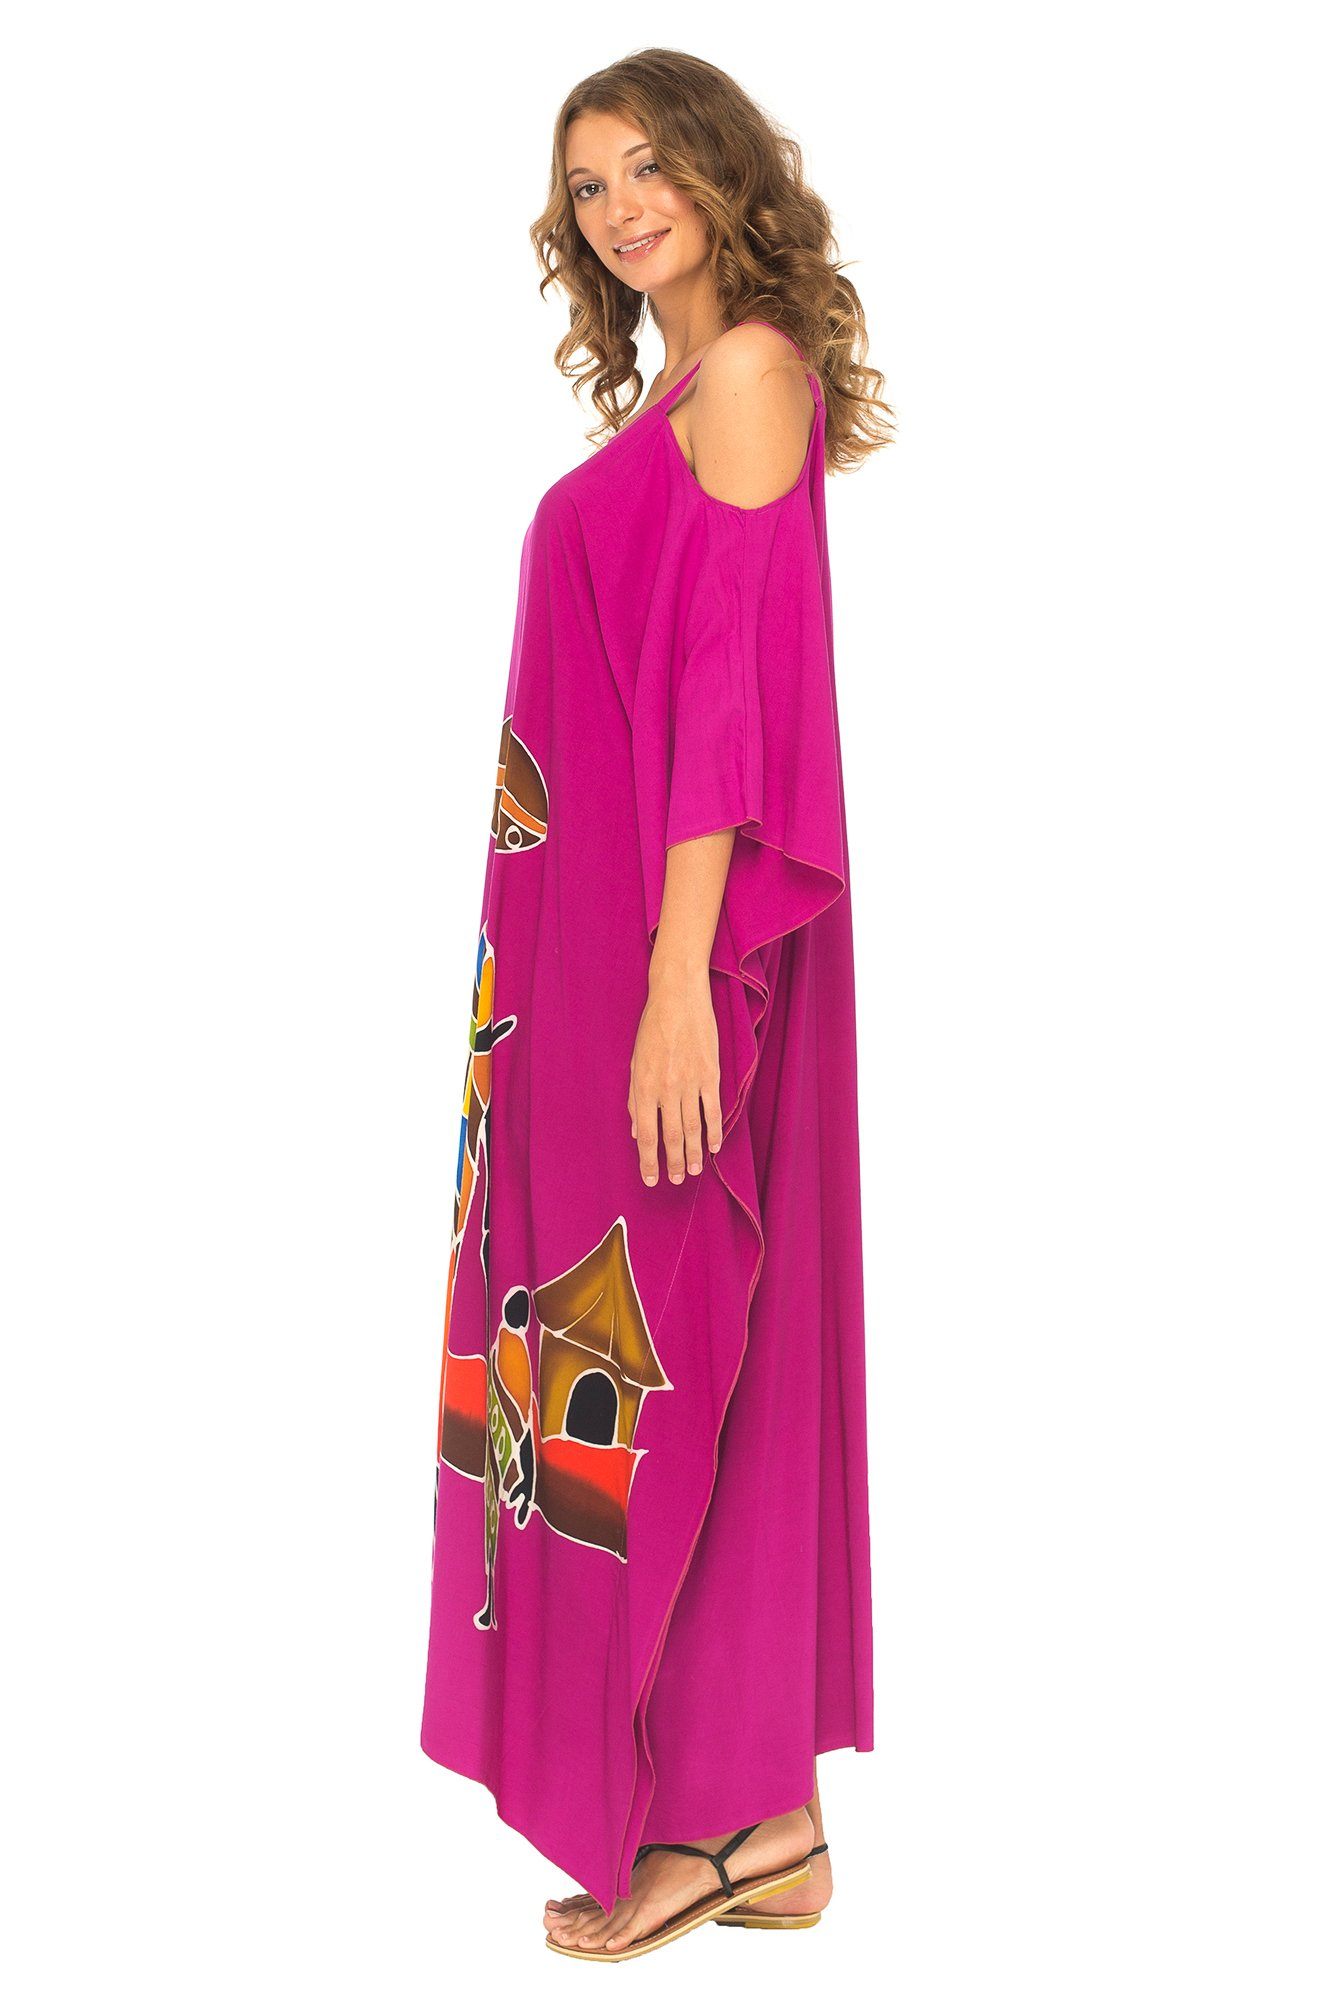 Hand Painted Tribal Design Long Dress with Cold Shoulder Cut Outs - Love-Shu-Shi